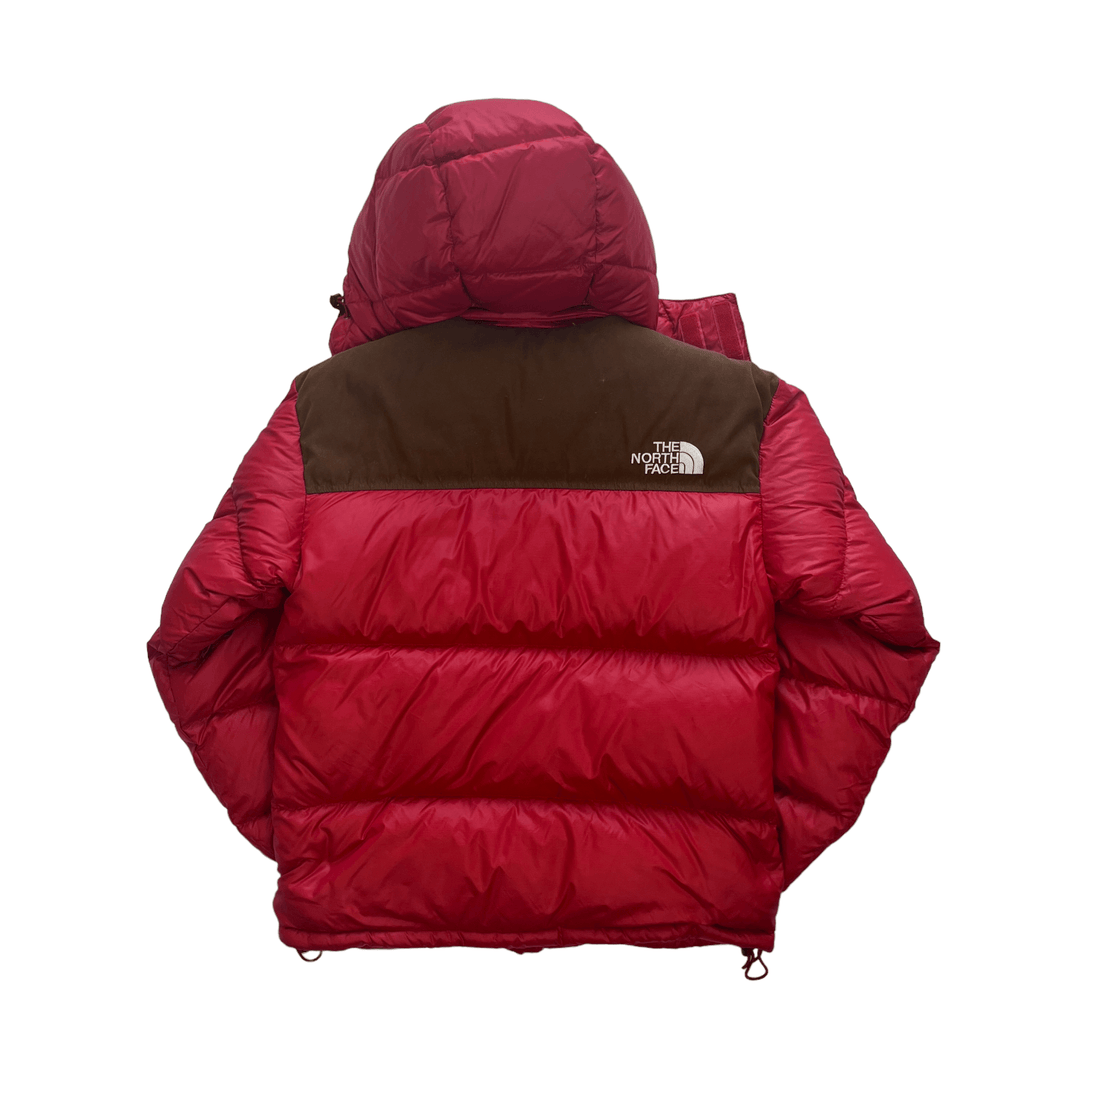 Vintage Red The North Face (TNF) 700 Puffer Coat - Small - The Streetwear Studio